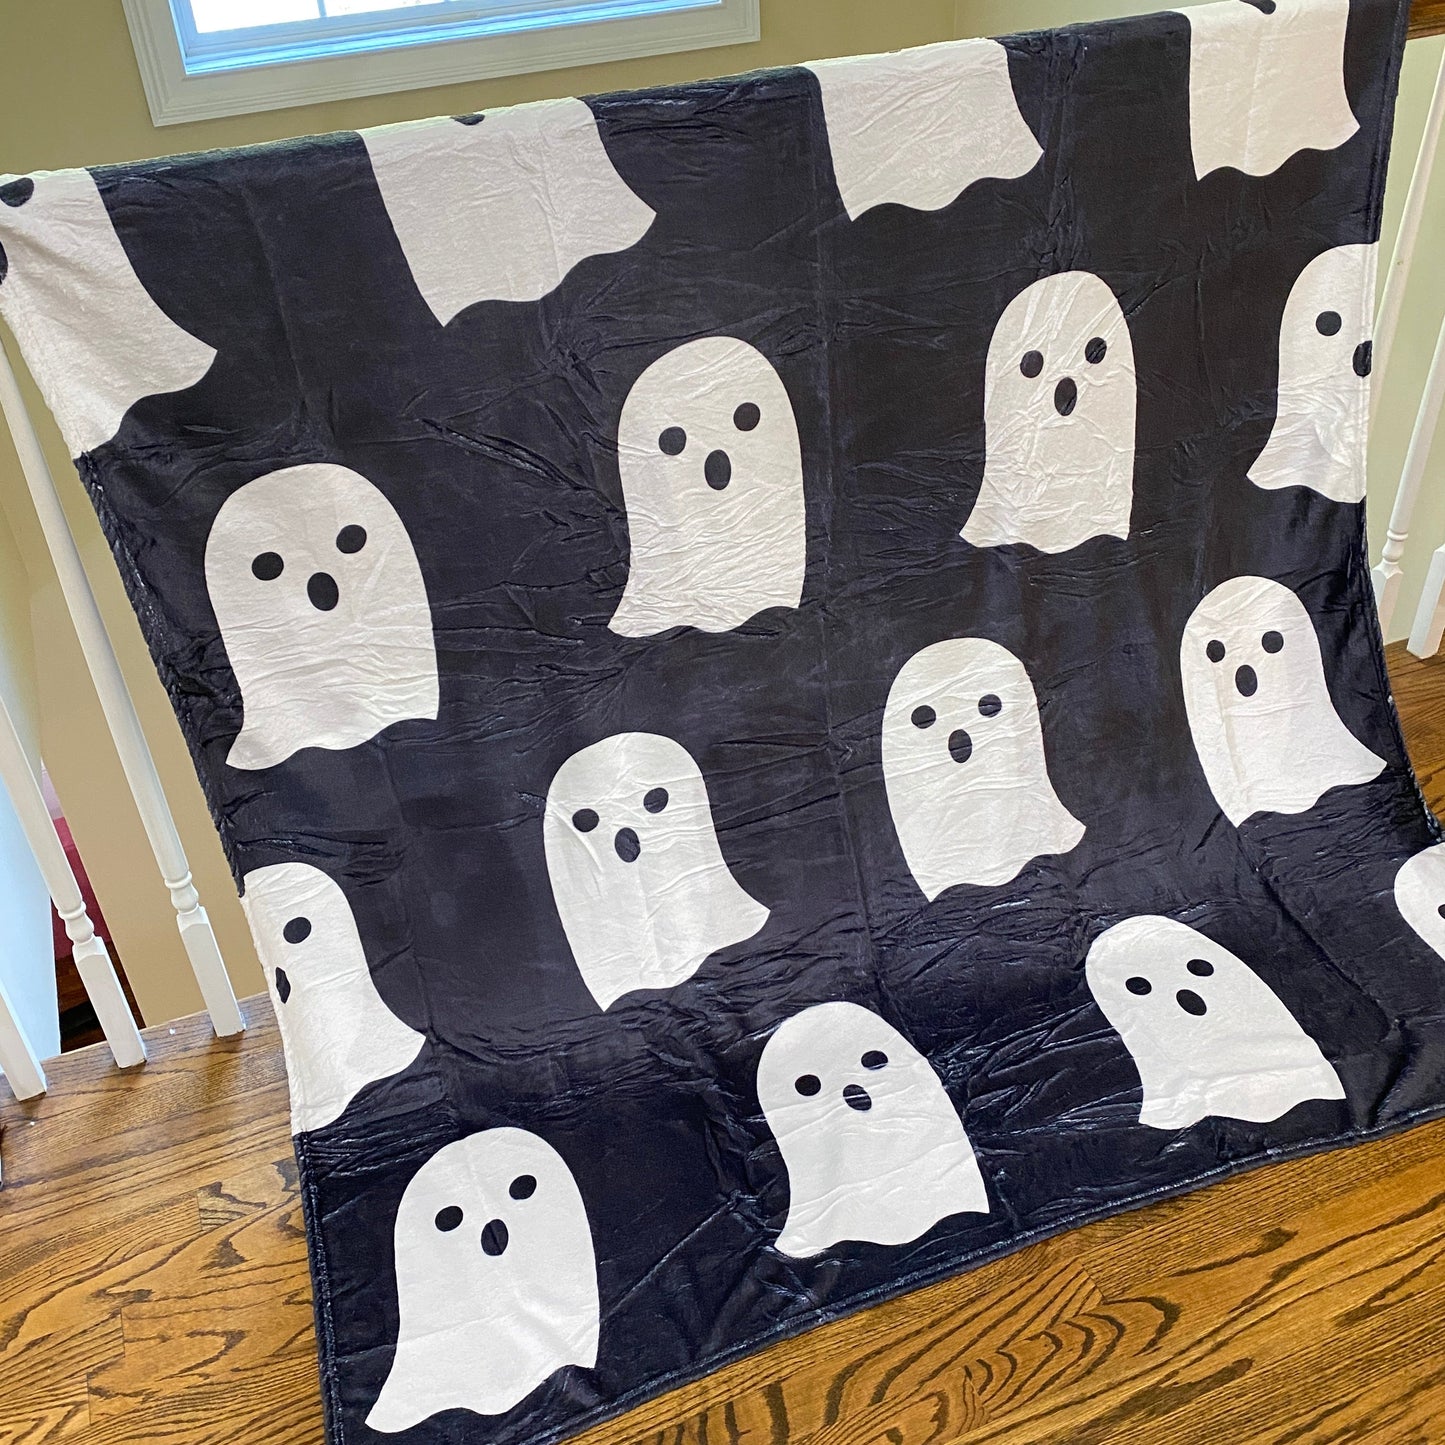 Blanket - Halloween - Double Sided Ghosts Black & White